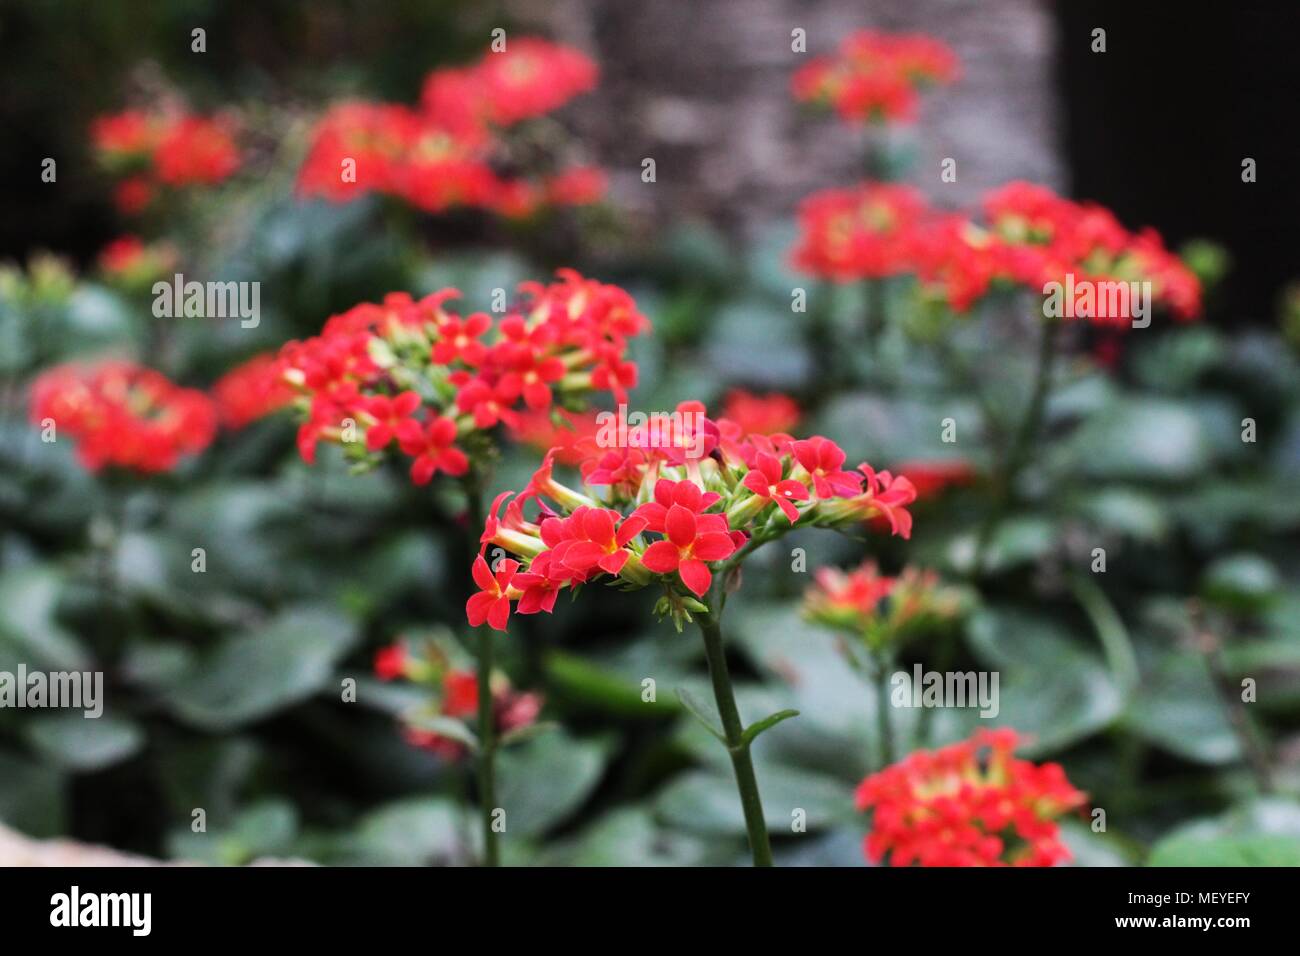 Red kalanchoe flowers Stock Photo